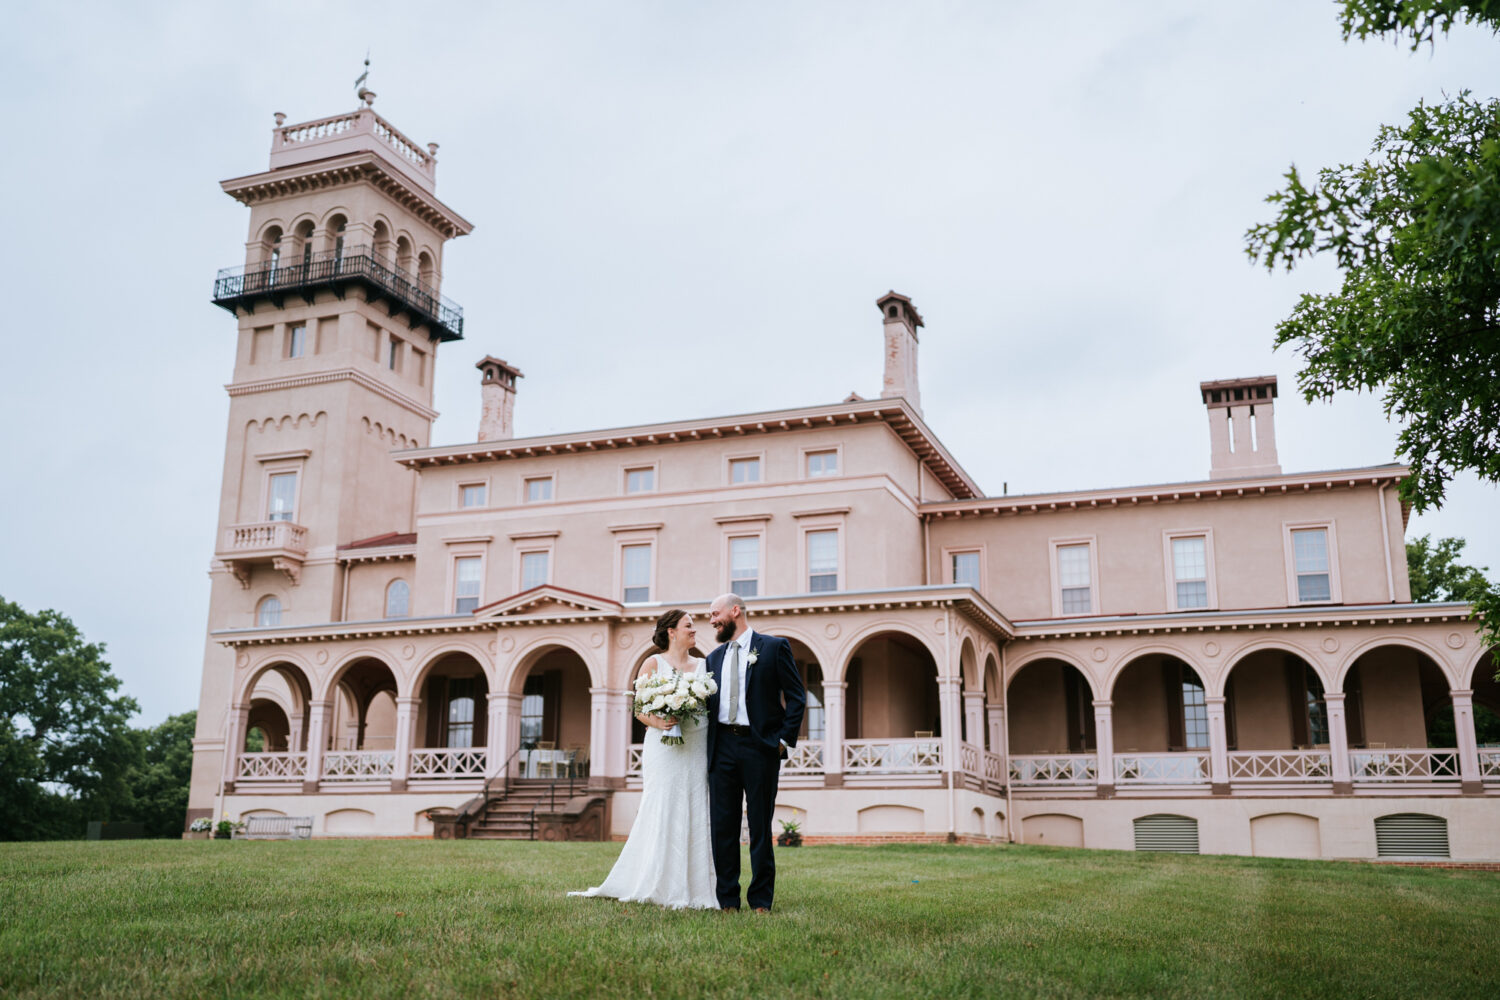 bride and groom portrait in front of the clifton mansion building in baltimore maryland